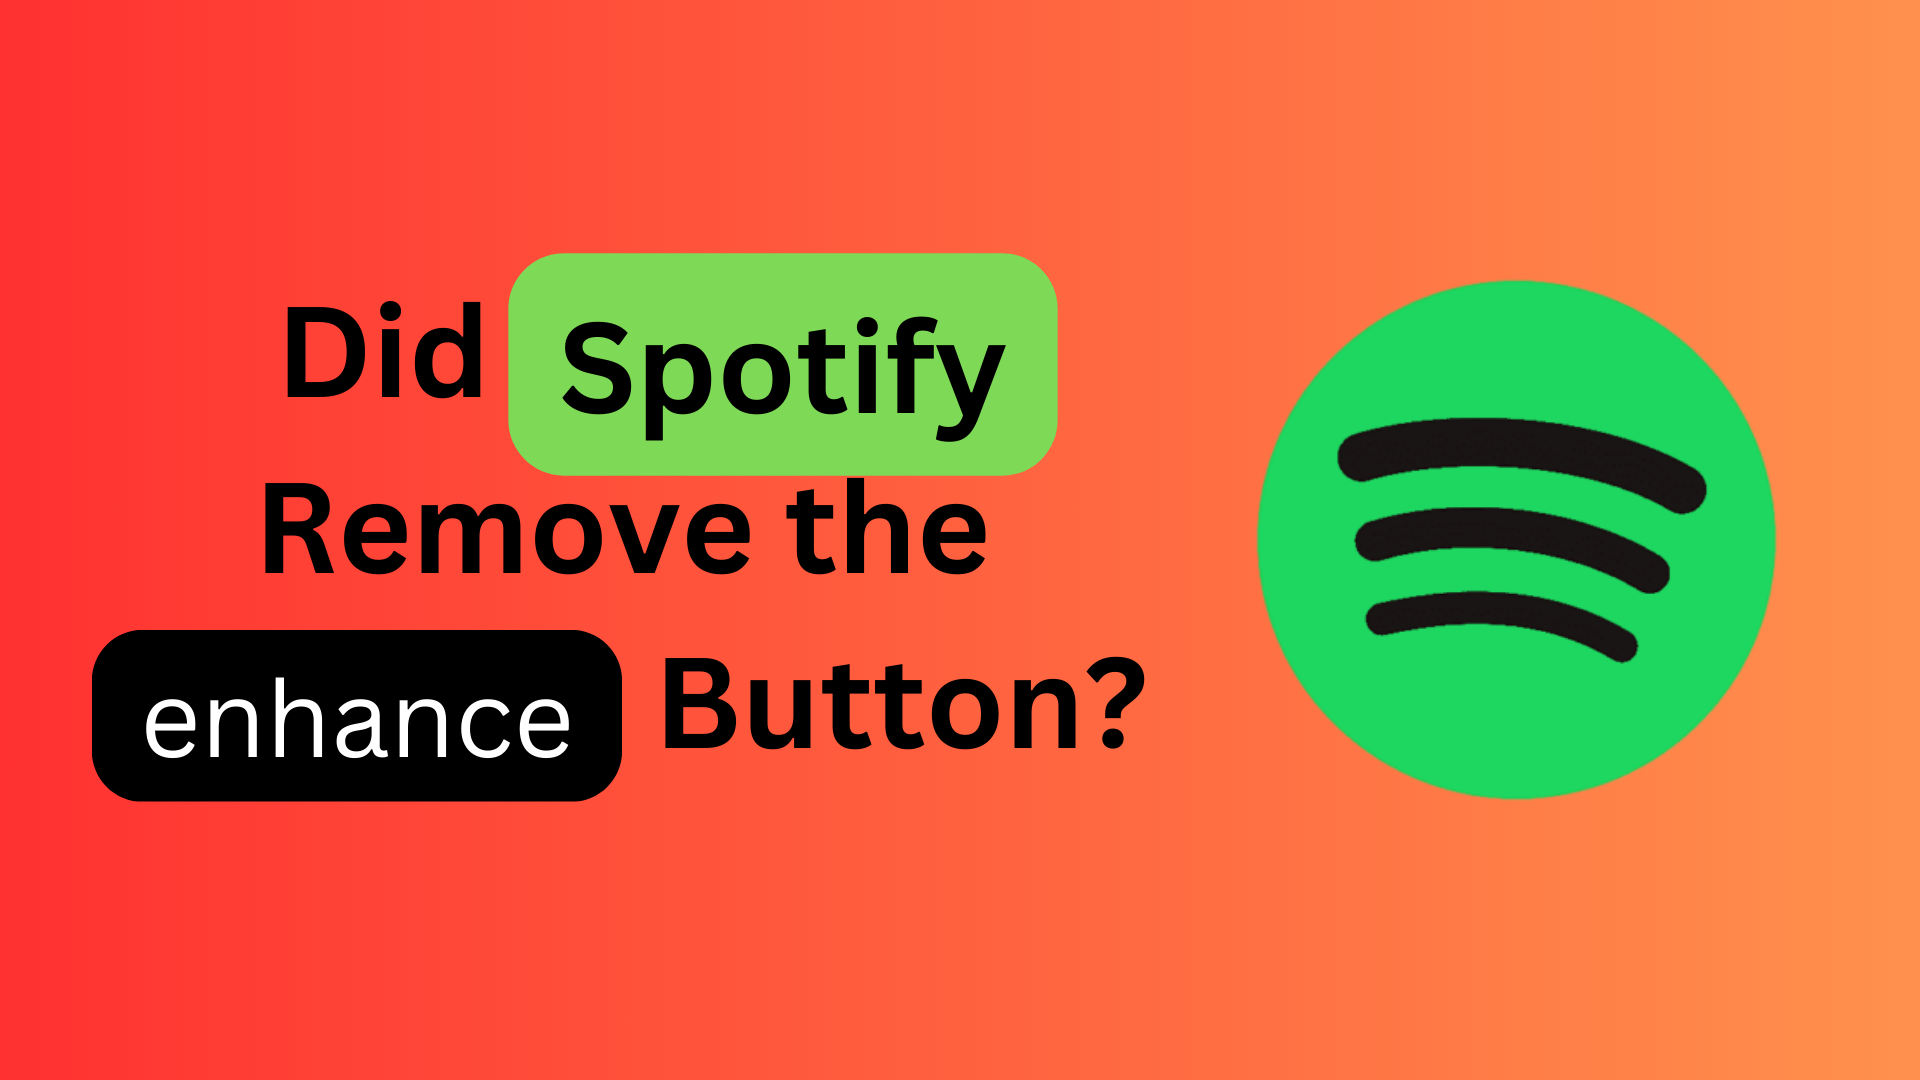 Did Spotify Remove the Enhance Button?